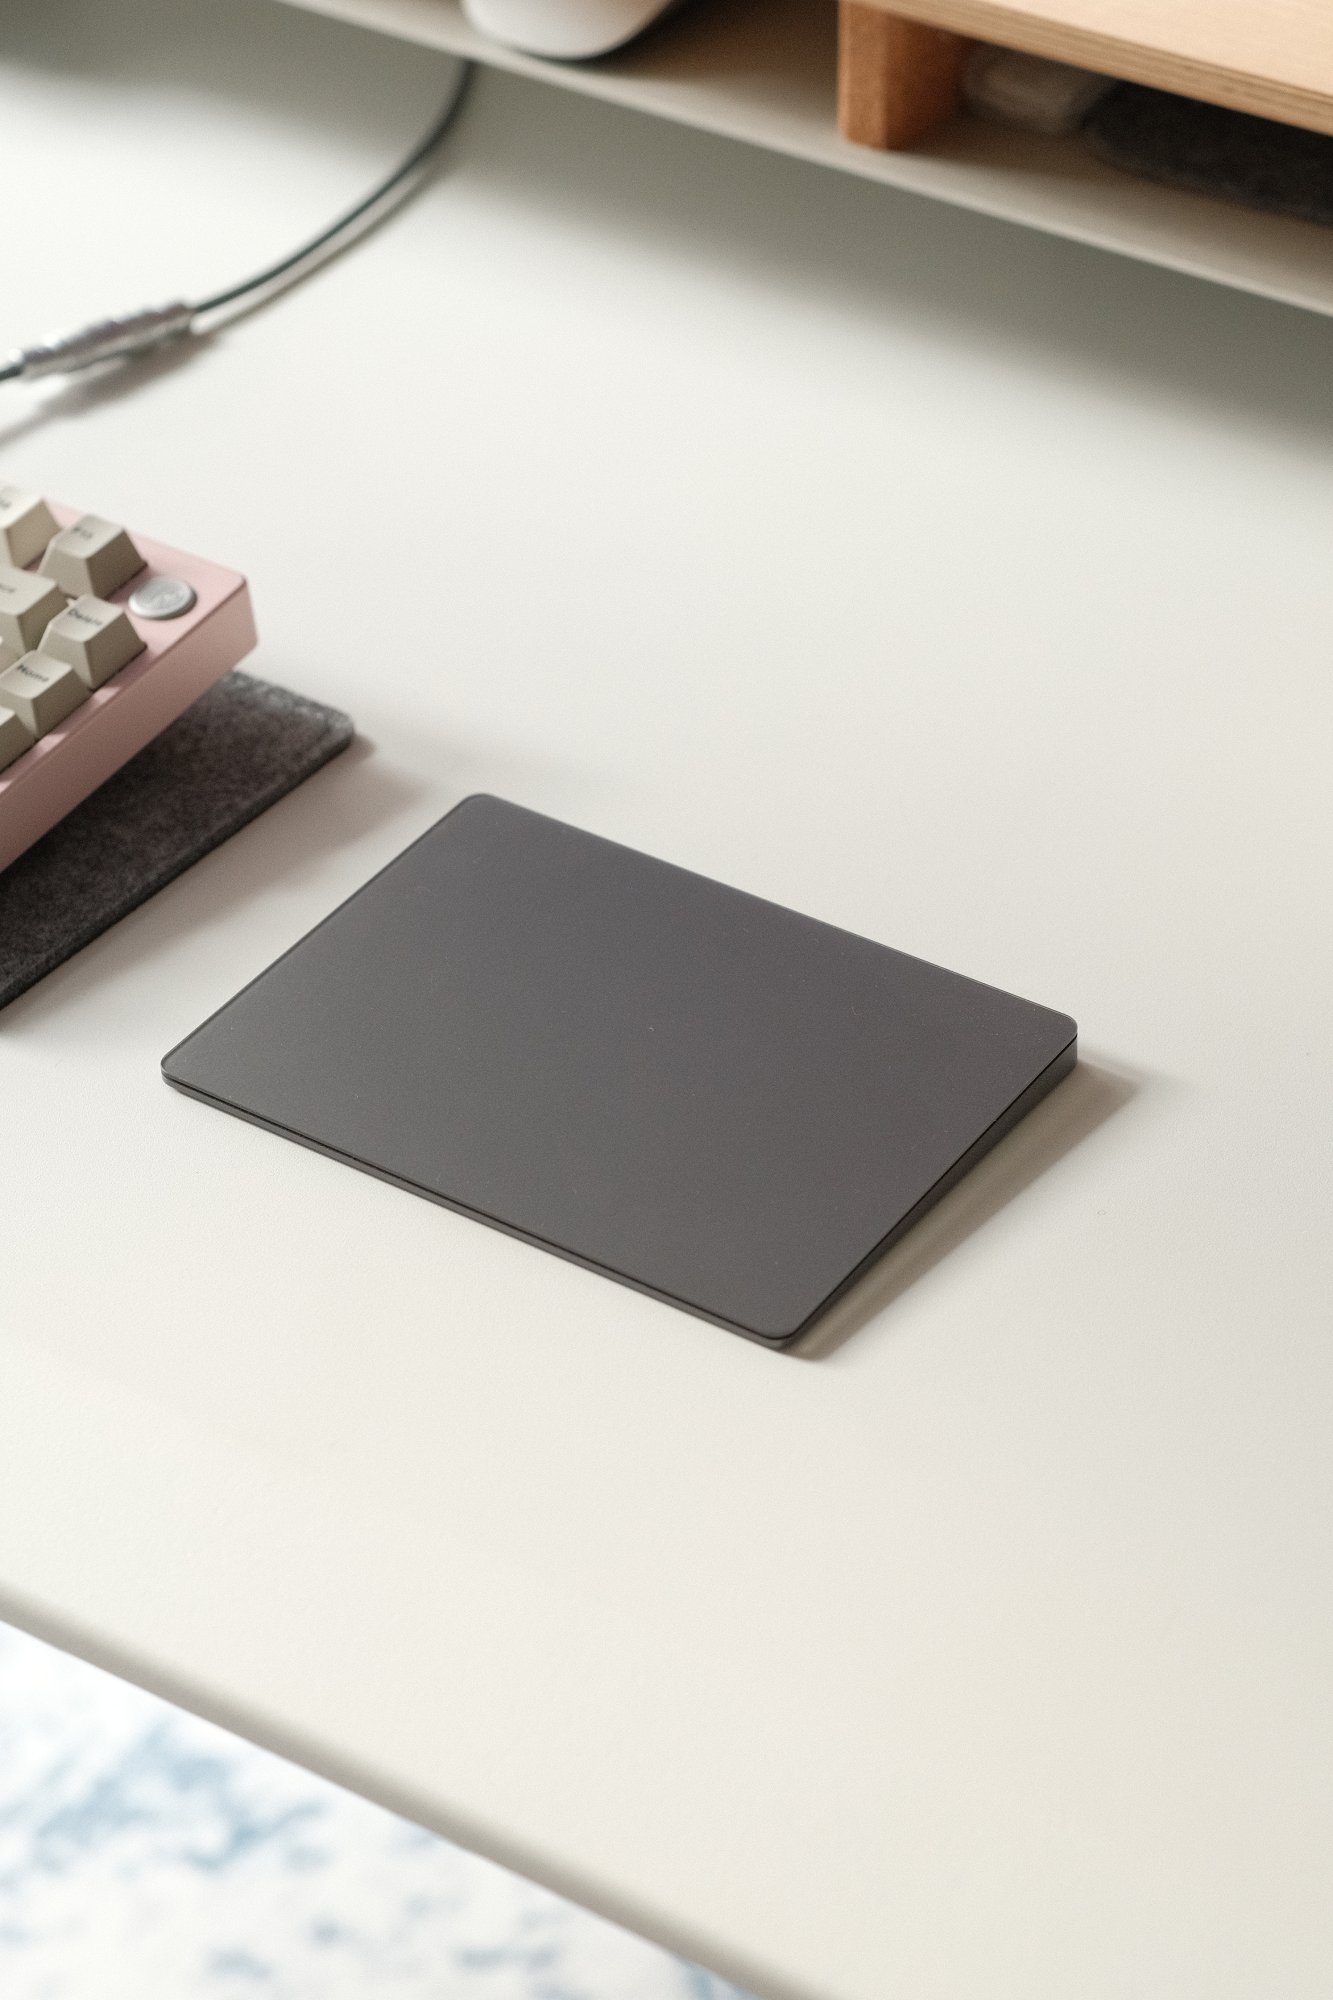 The Space Grey Apple Magic Trackpad at the desk setup